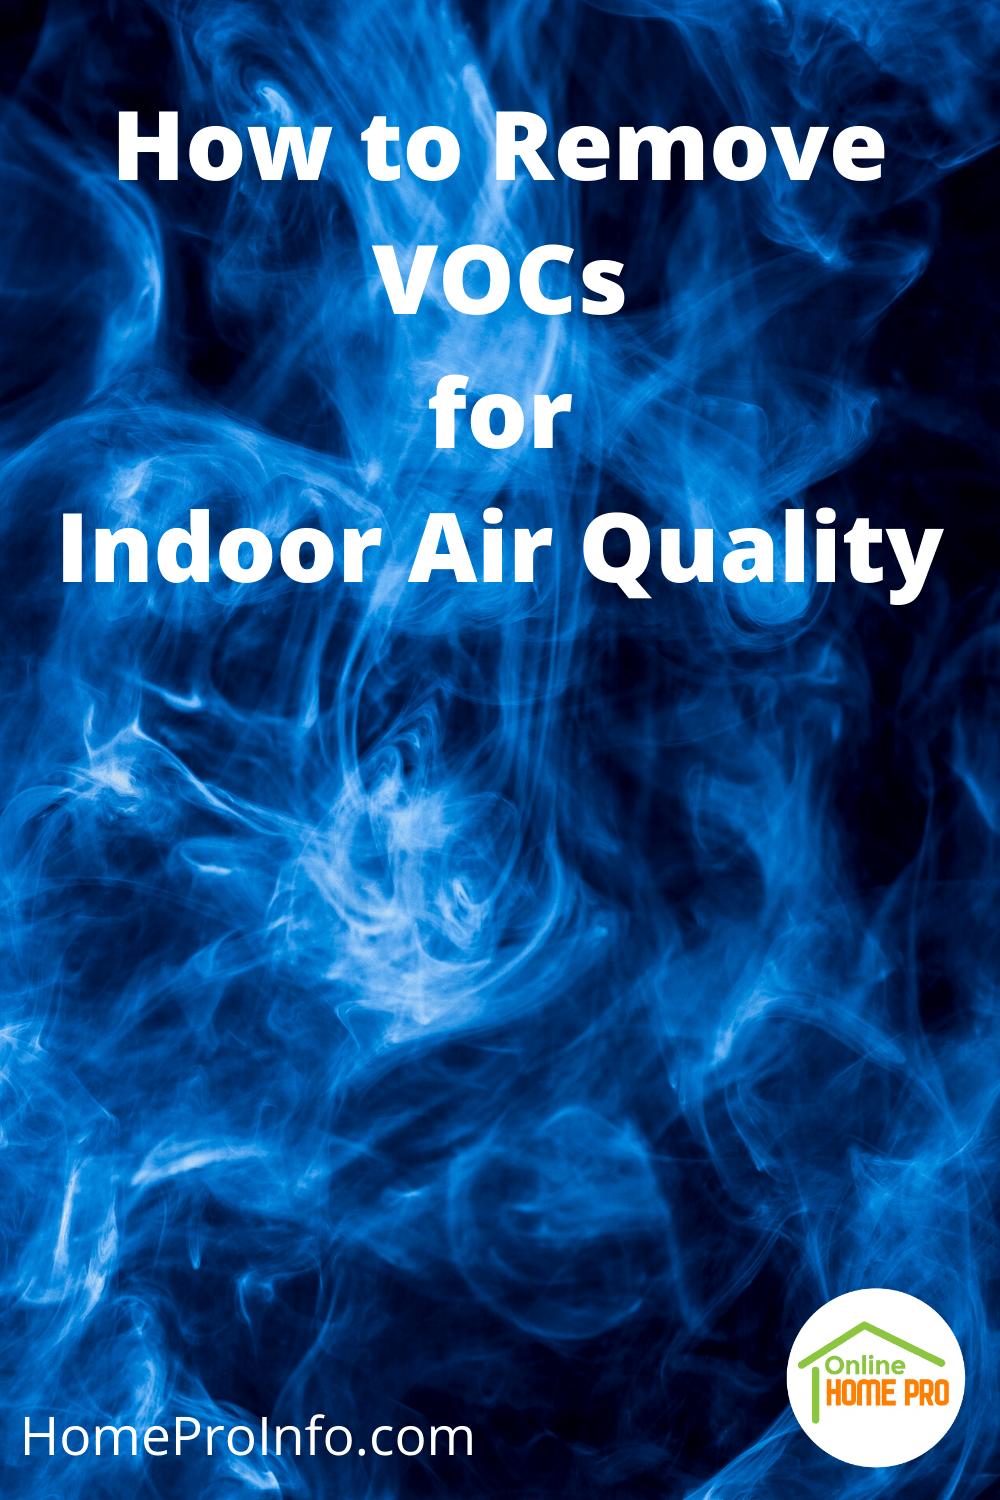 VOCs and Indoor Air Quality